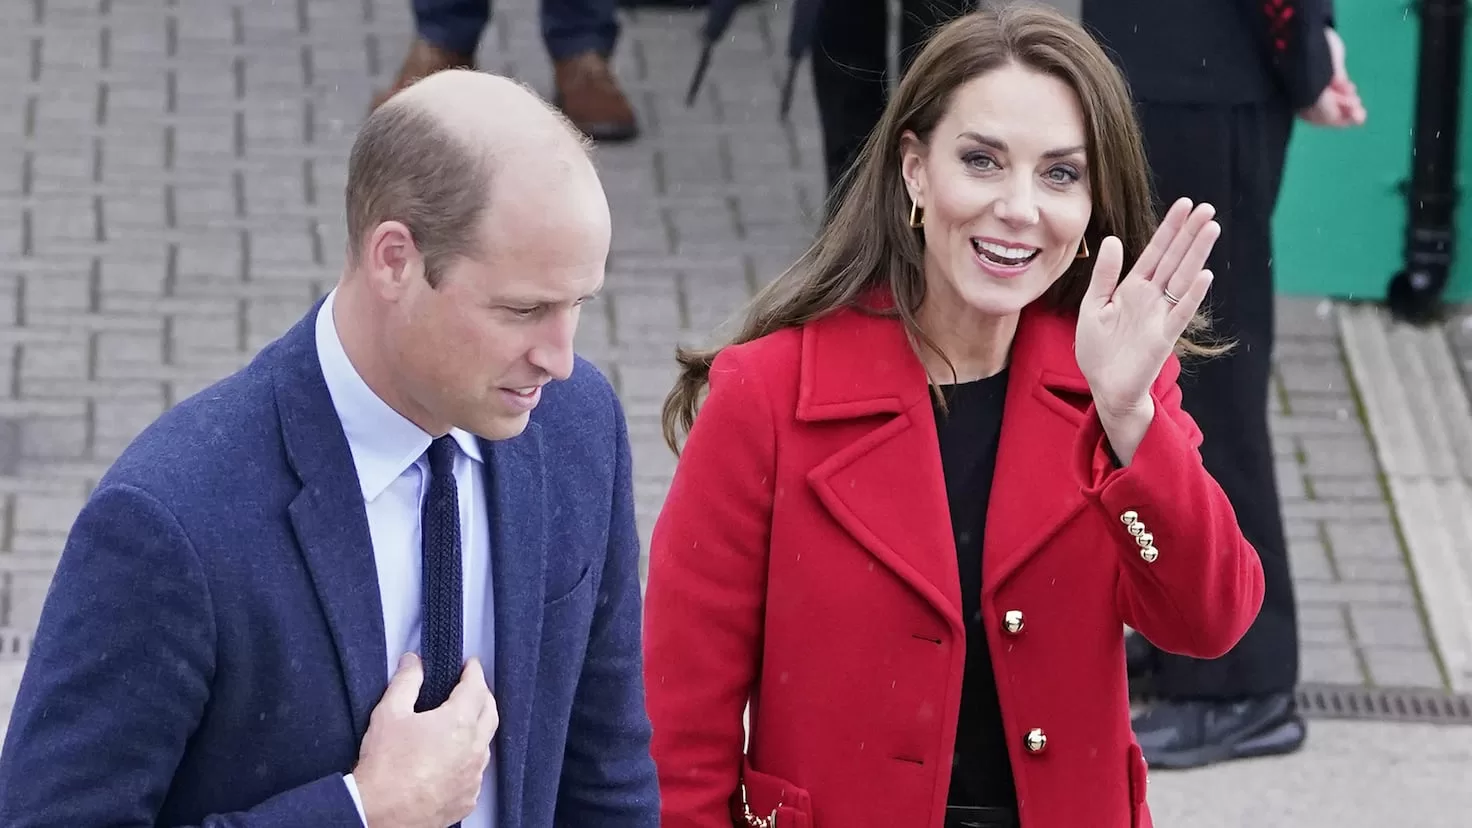 Kate Middleton officially reappears after her abdominal operation
